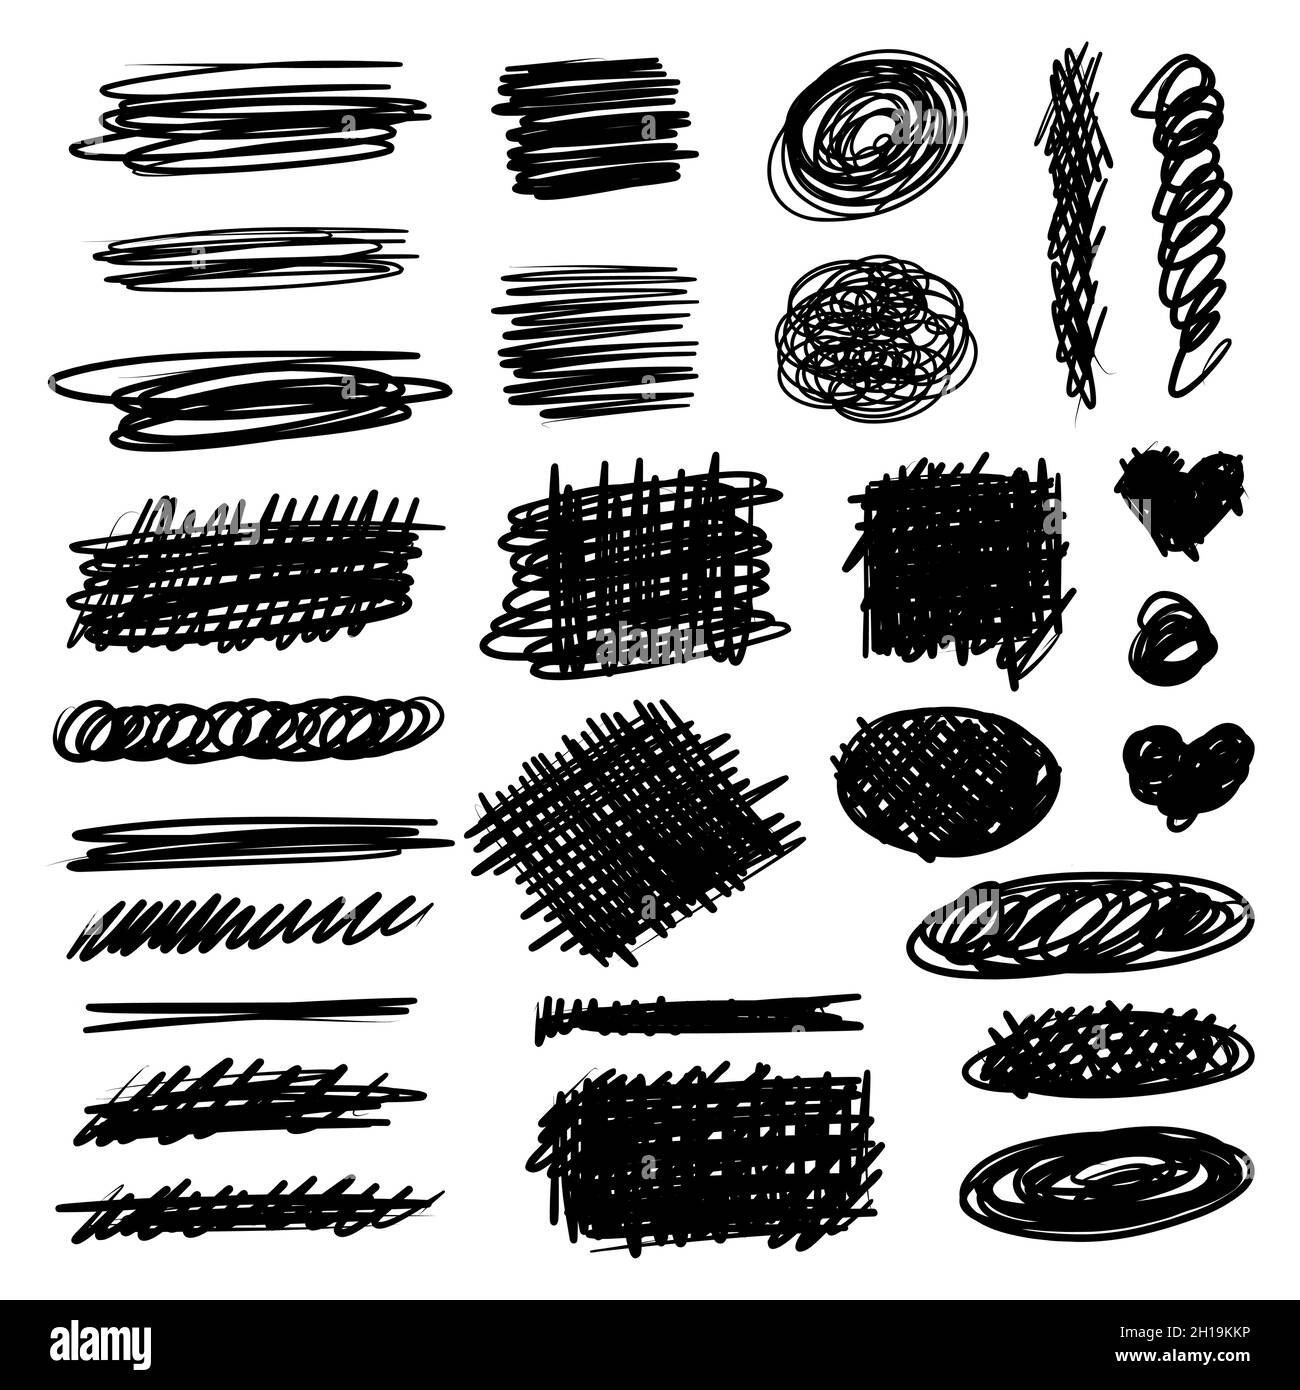 Scribble pen strokes. Doodle pencil scratch. Vector freehand shapes. Stock Vector